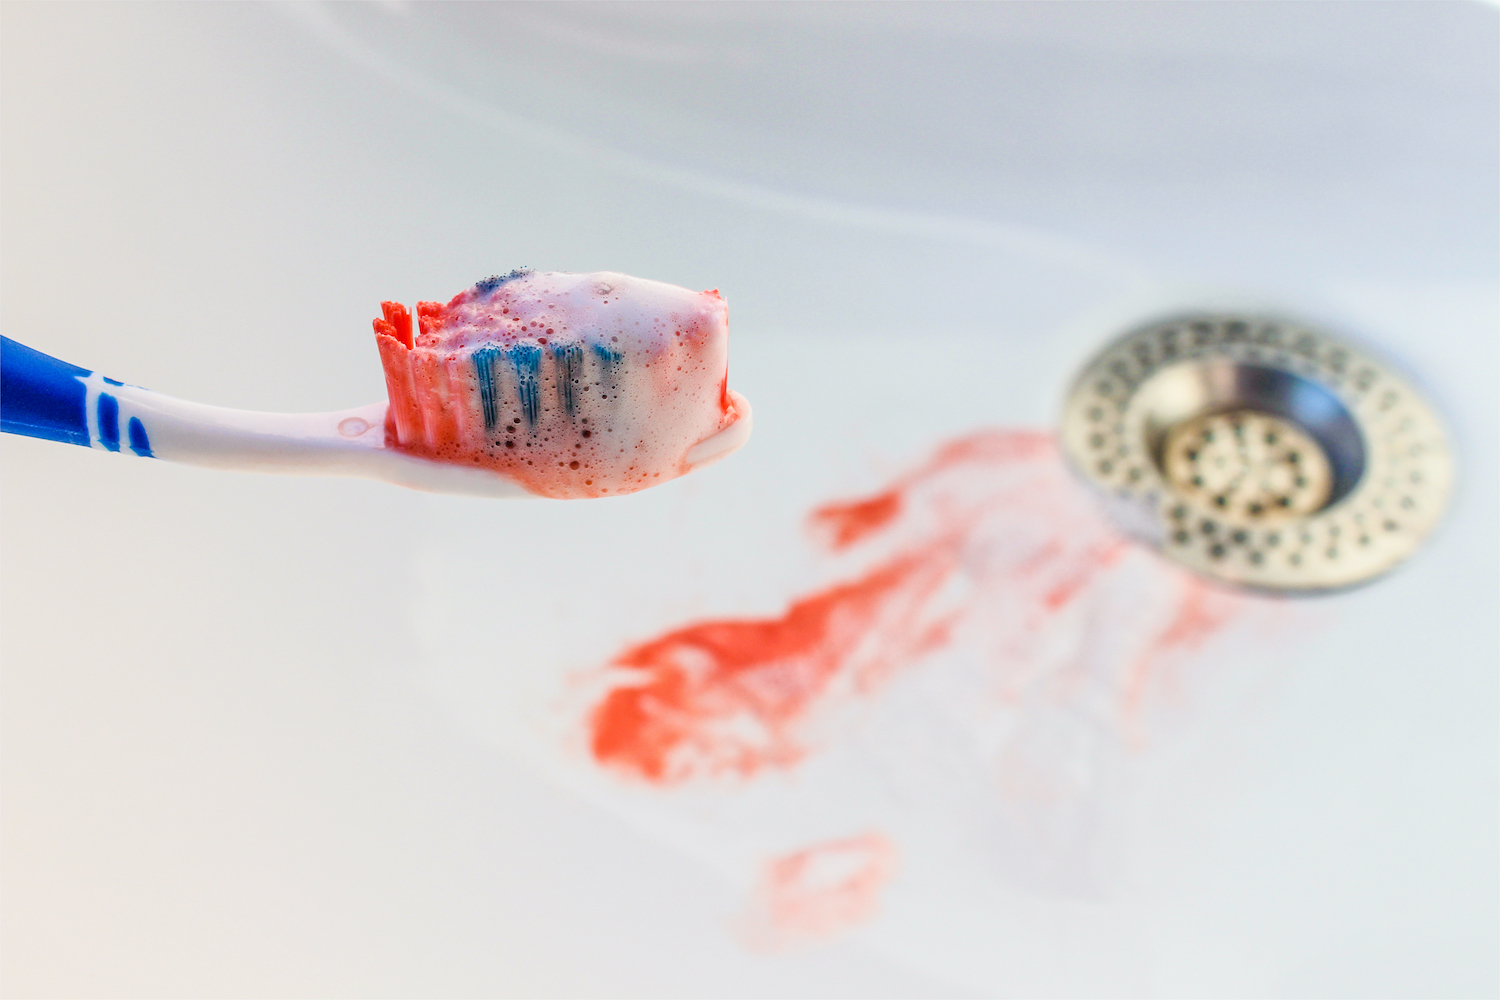 Closeup of a toothbrush with blood on it over a sink with blood from gum disease